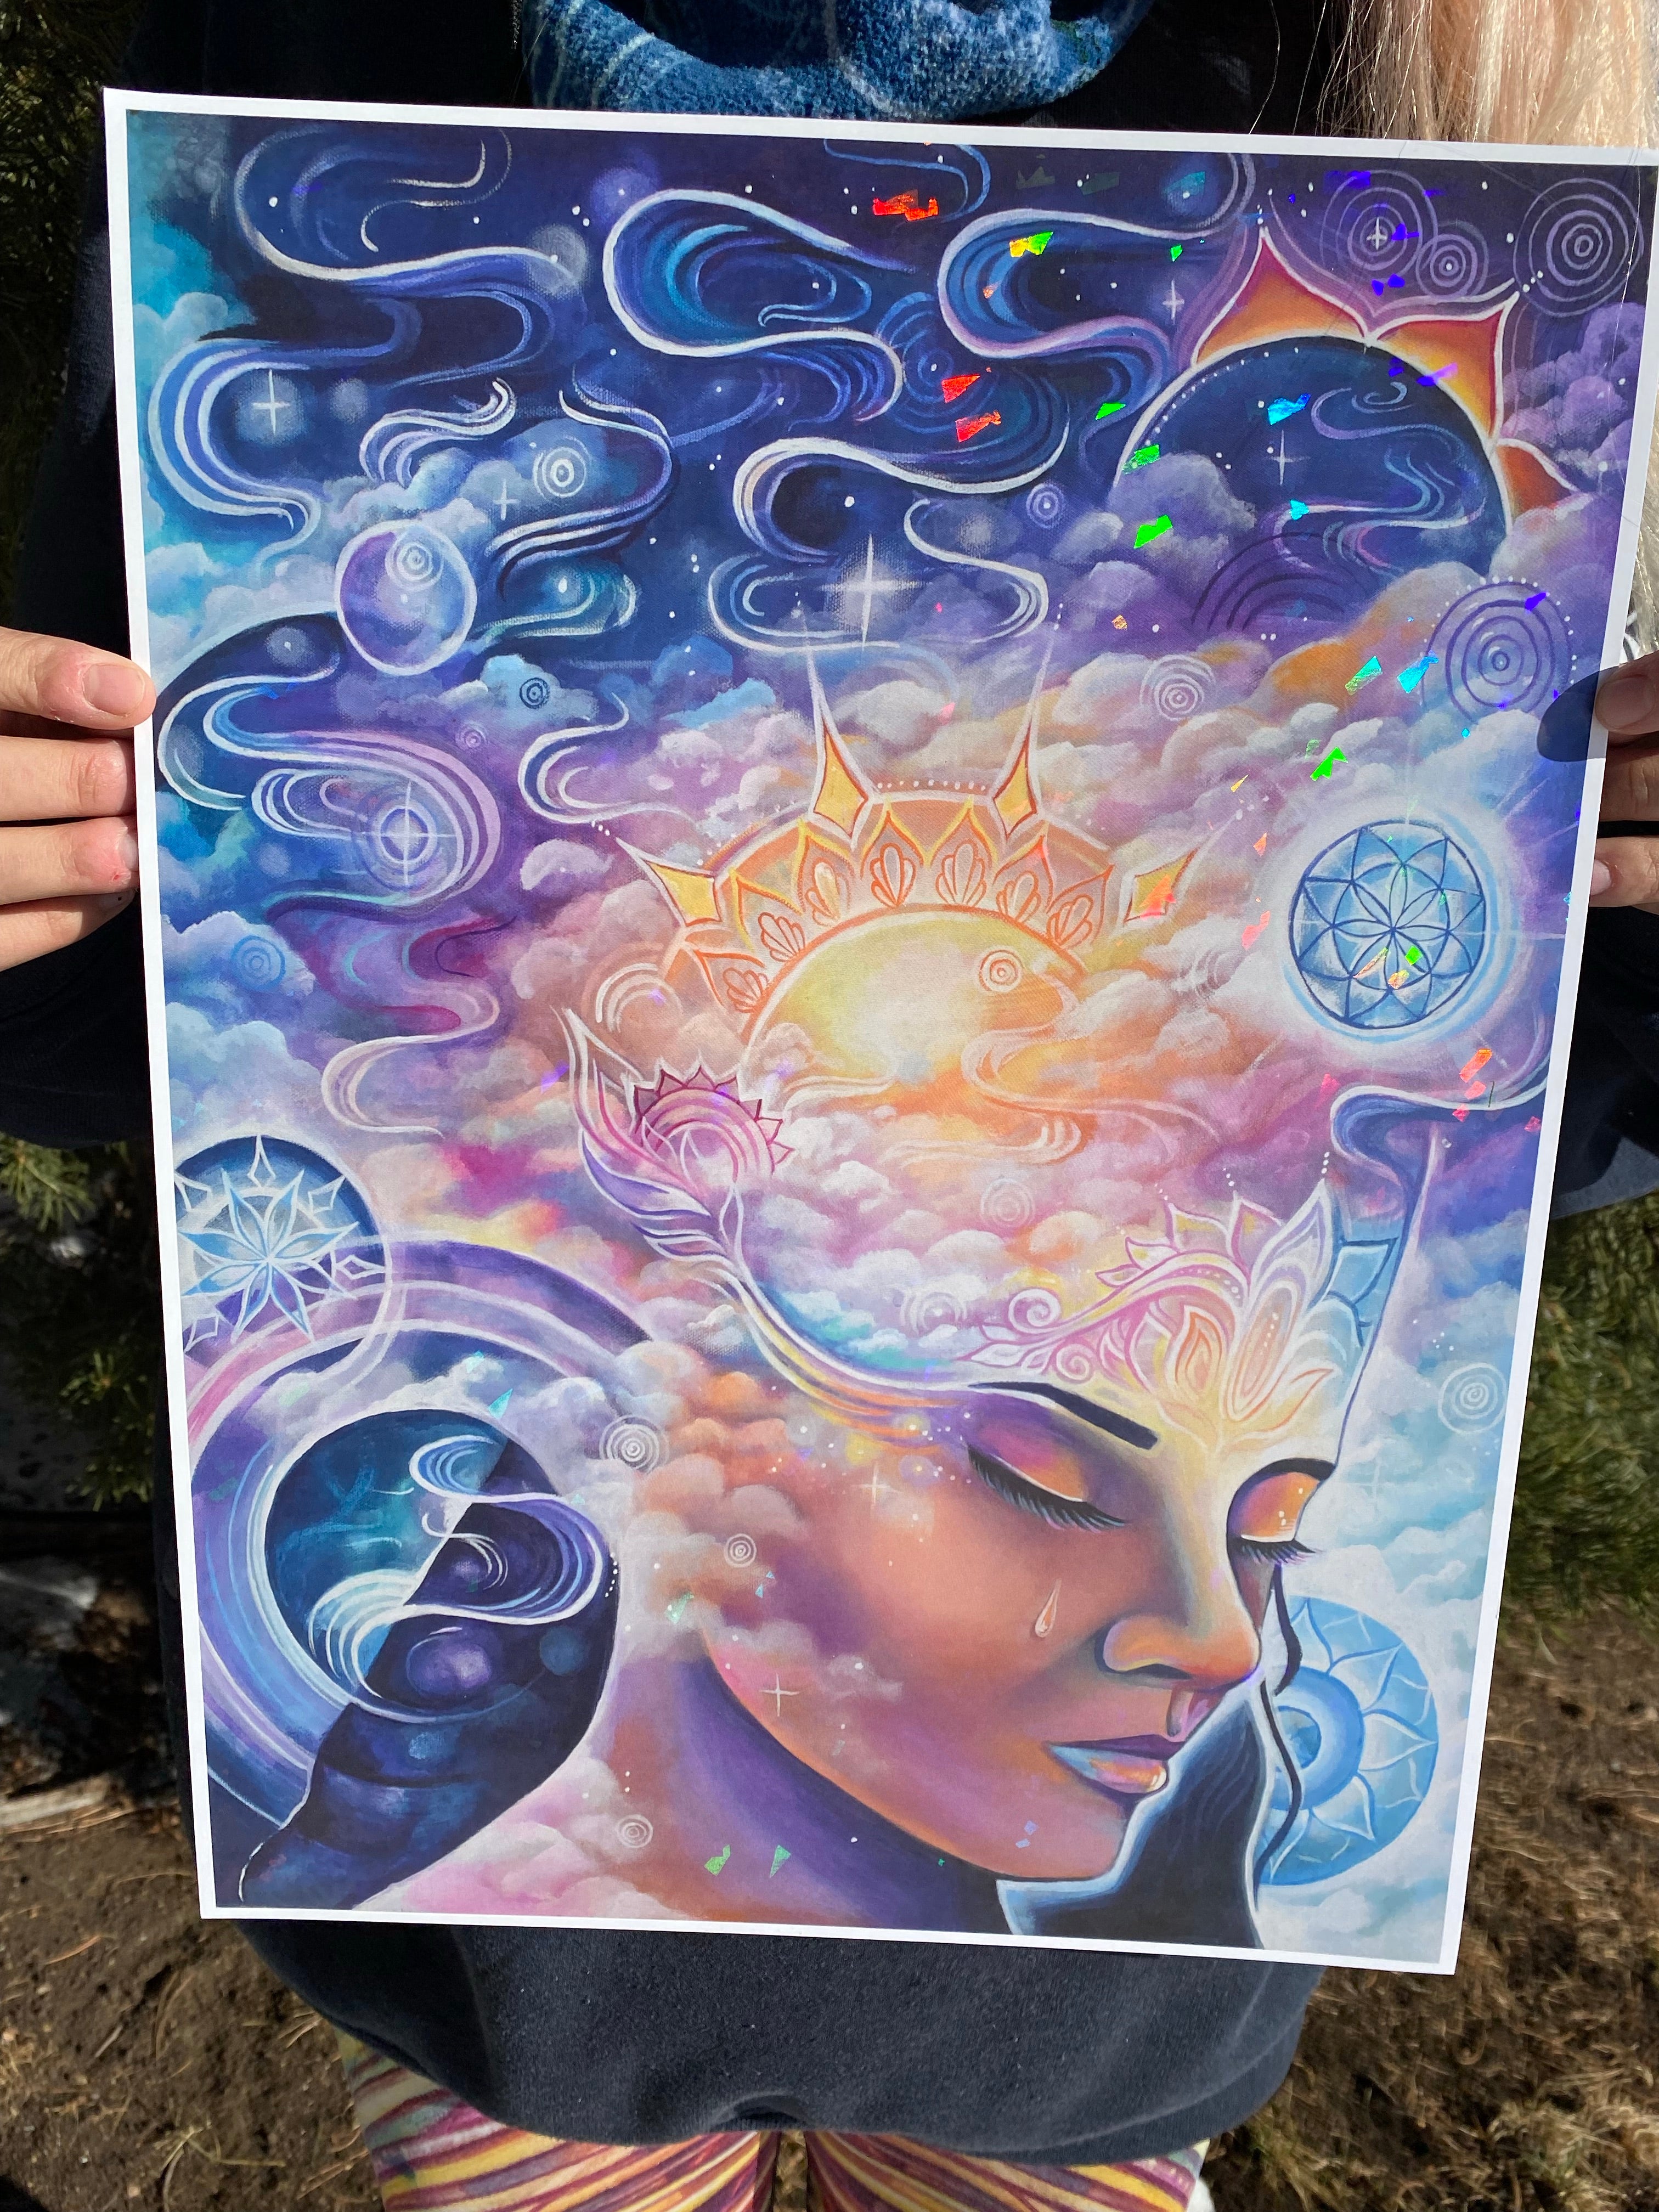 “Reconnection” Holographic Prints